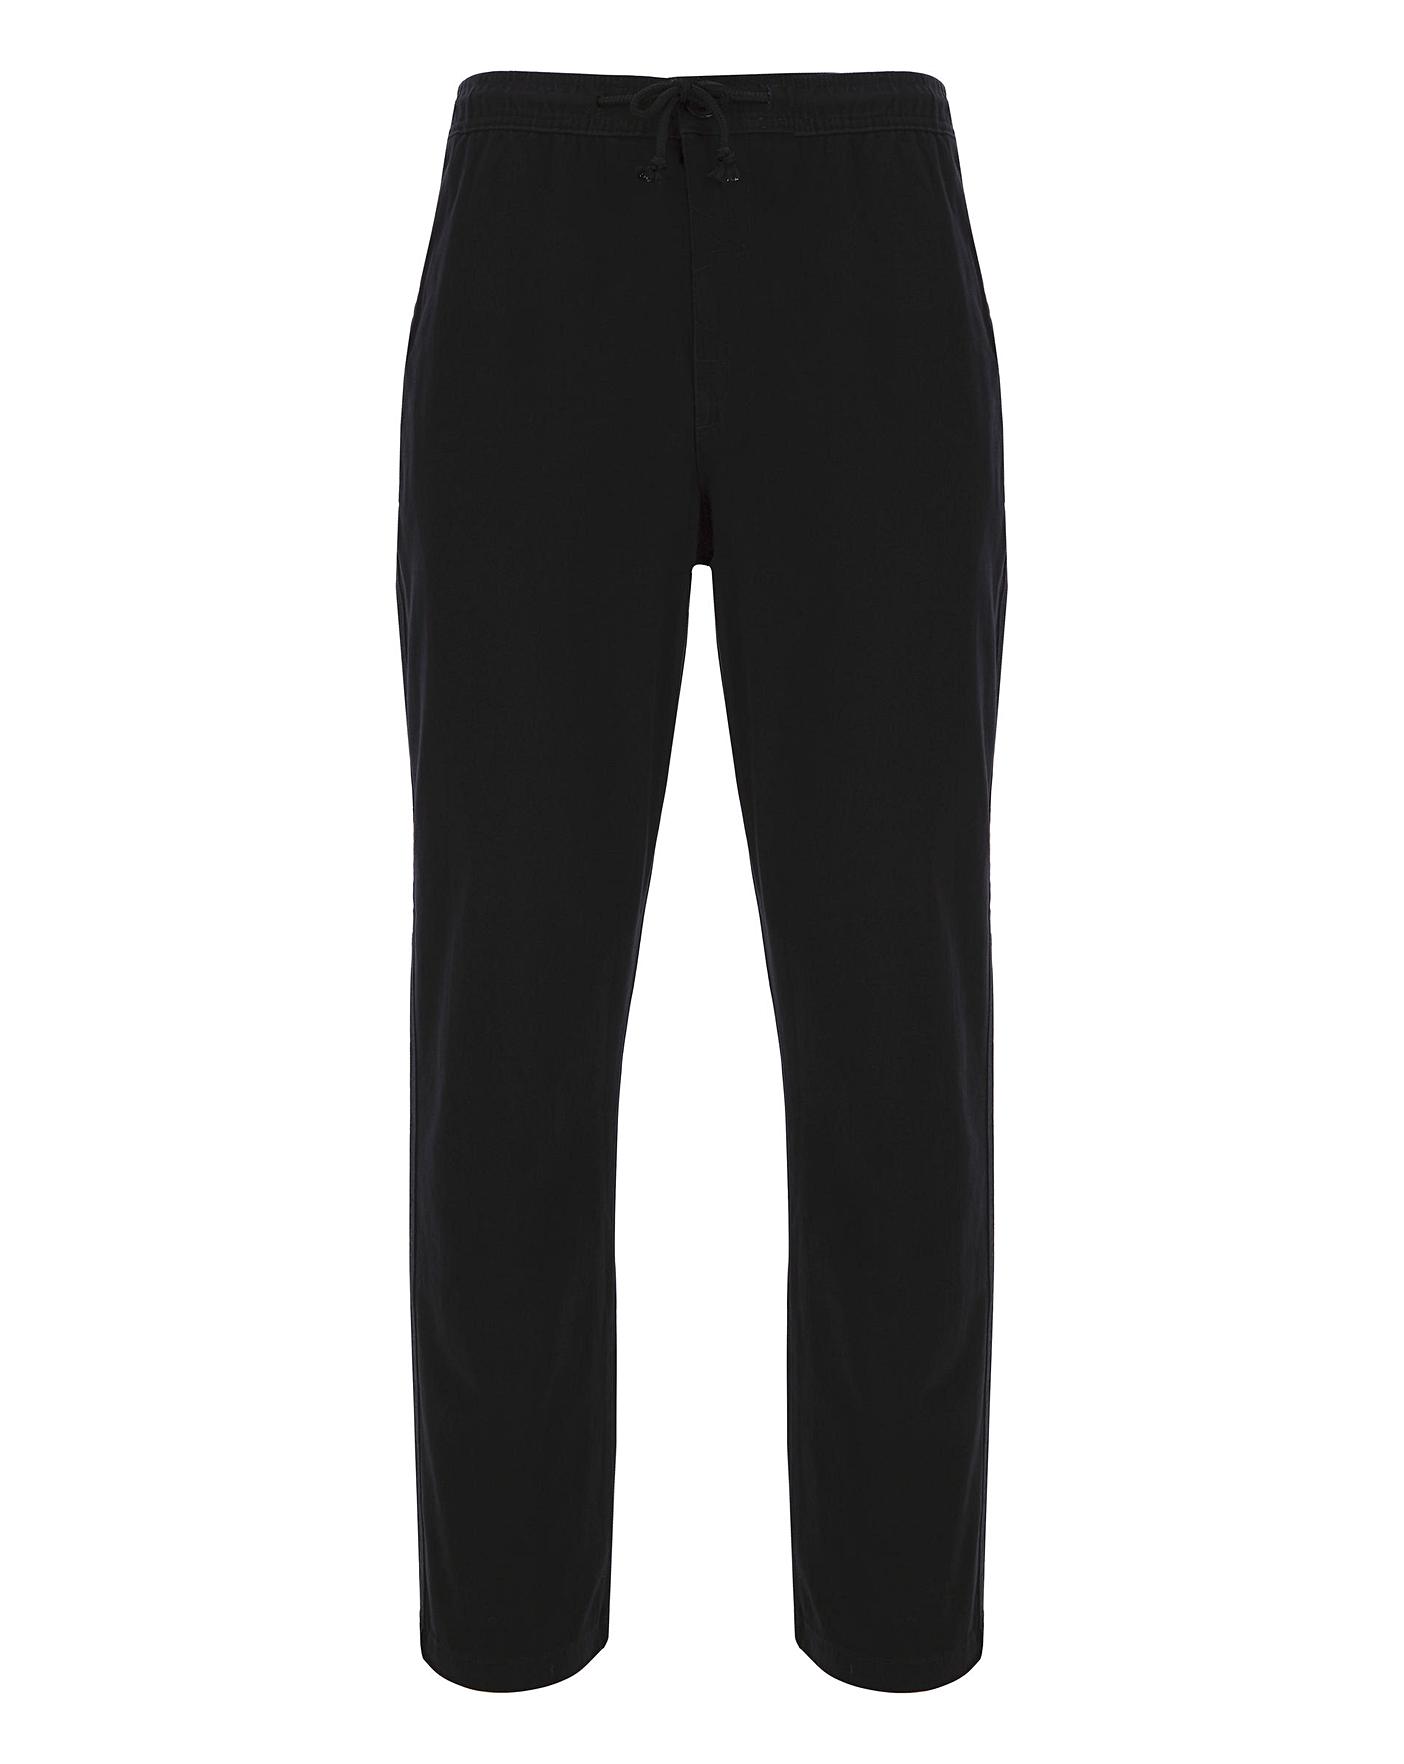 Cotton Rugby Trousers 29in | Premier Man